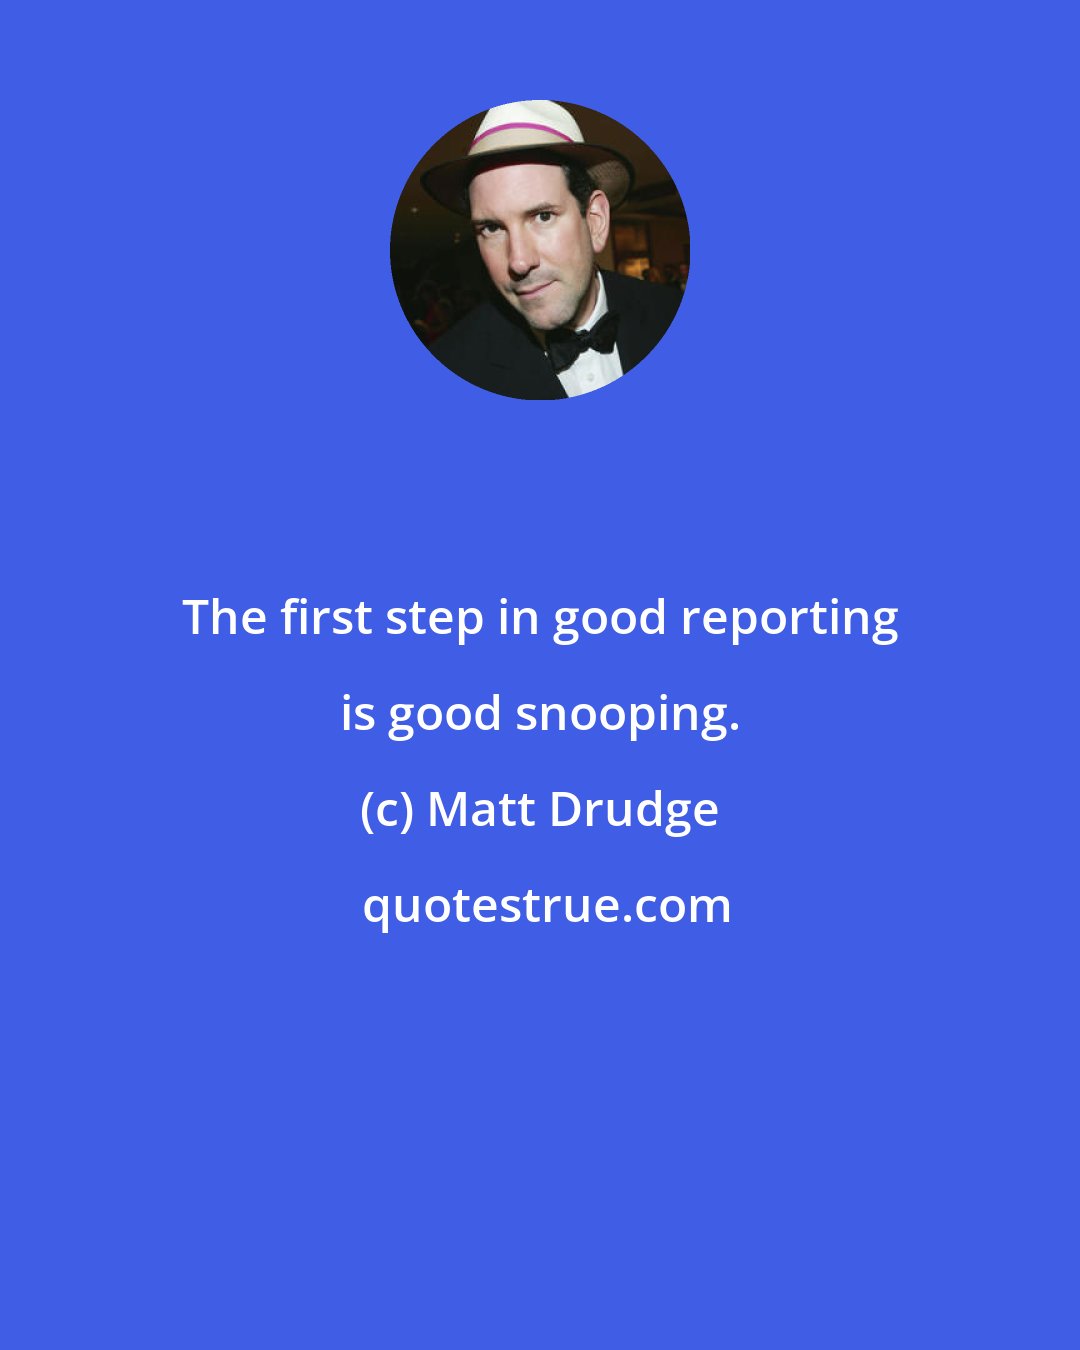 Matt Drudge: The first step in good reporting is good snooping.